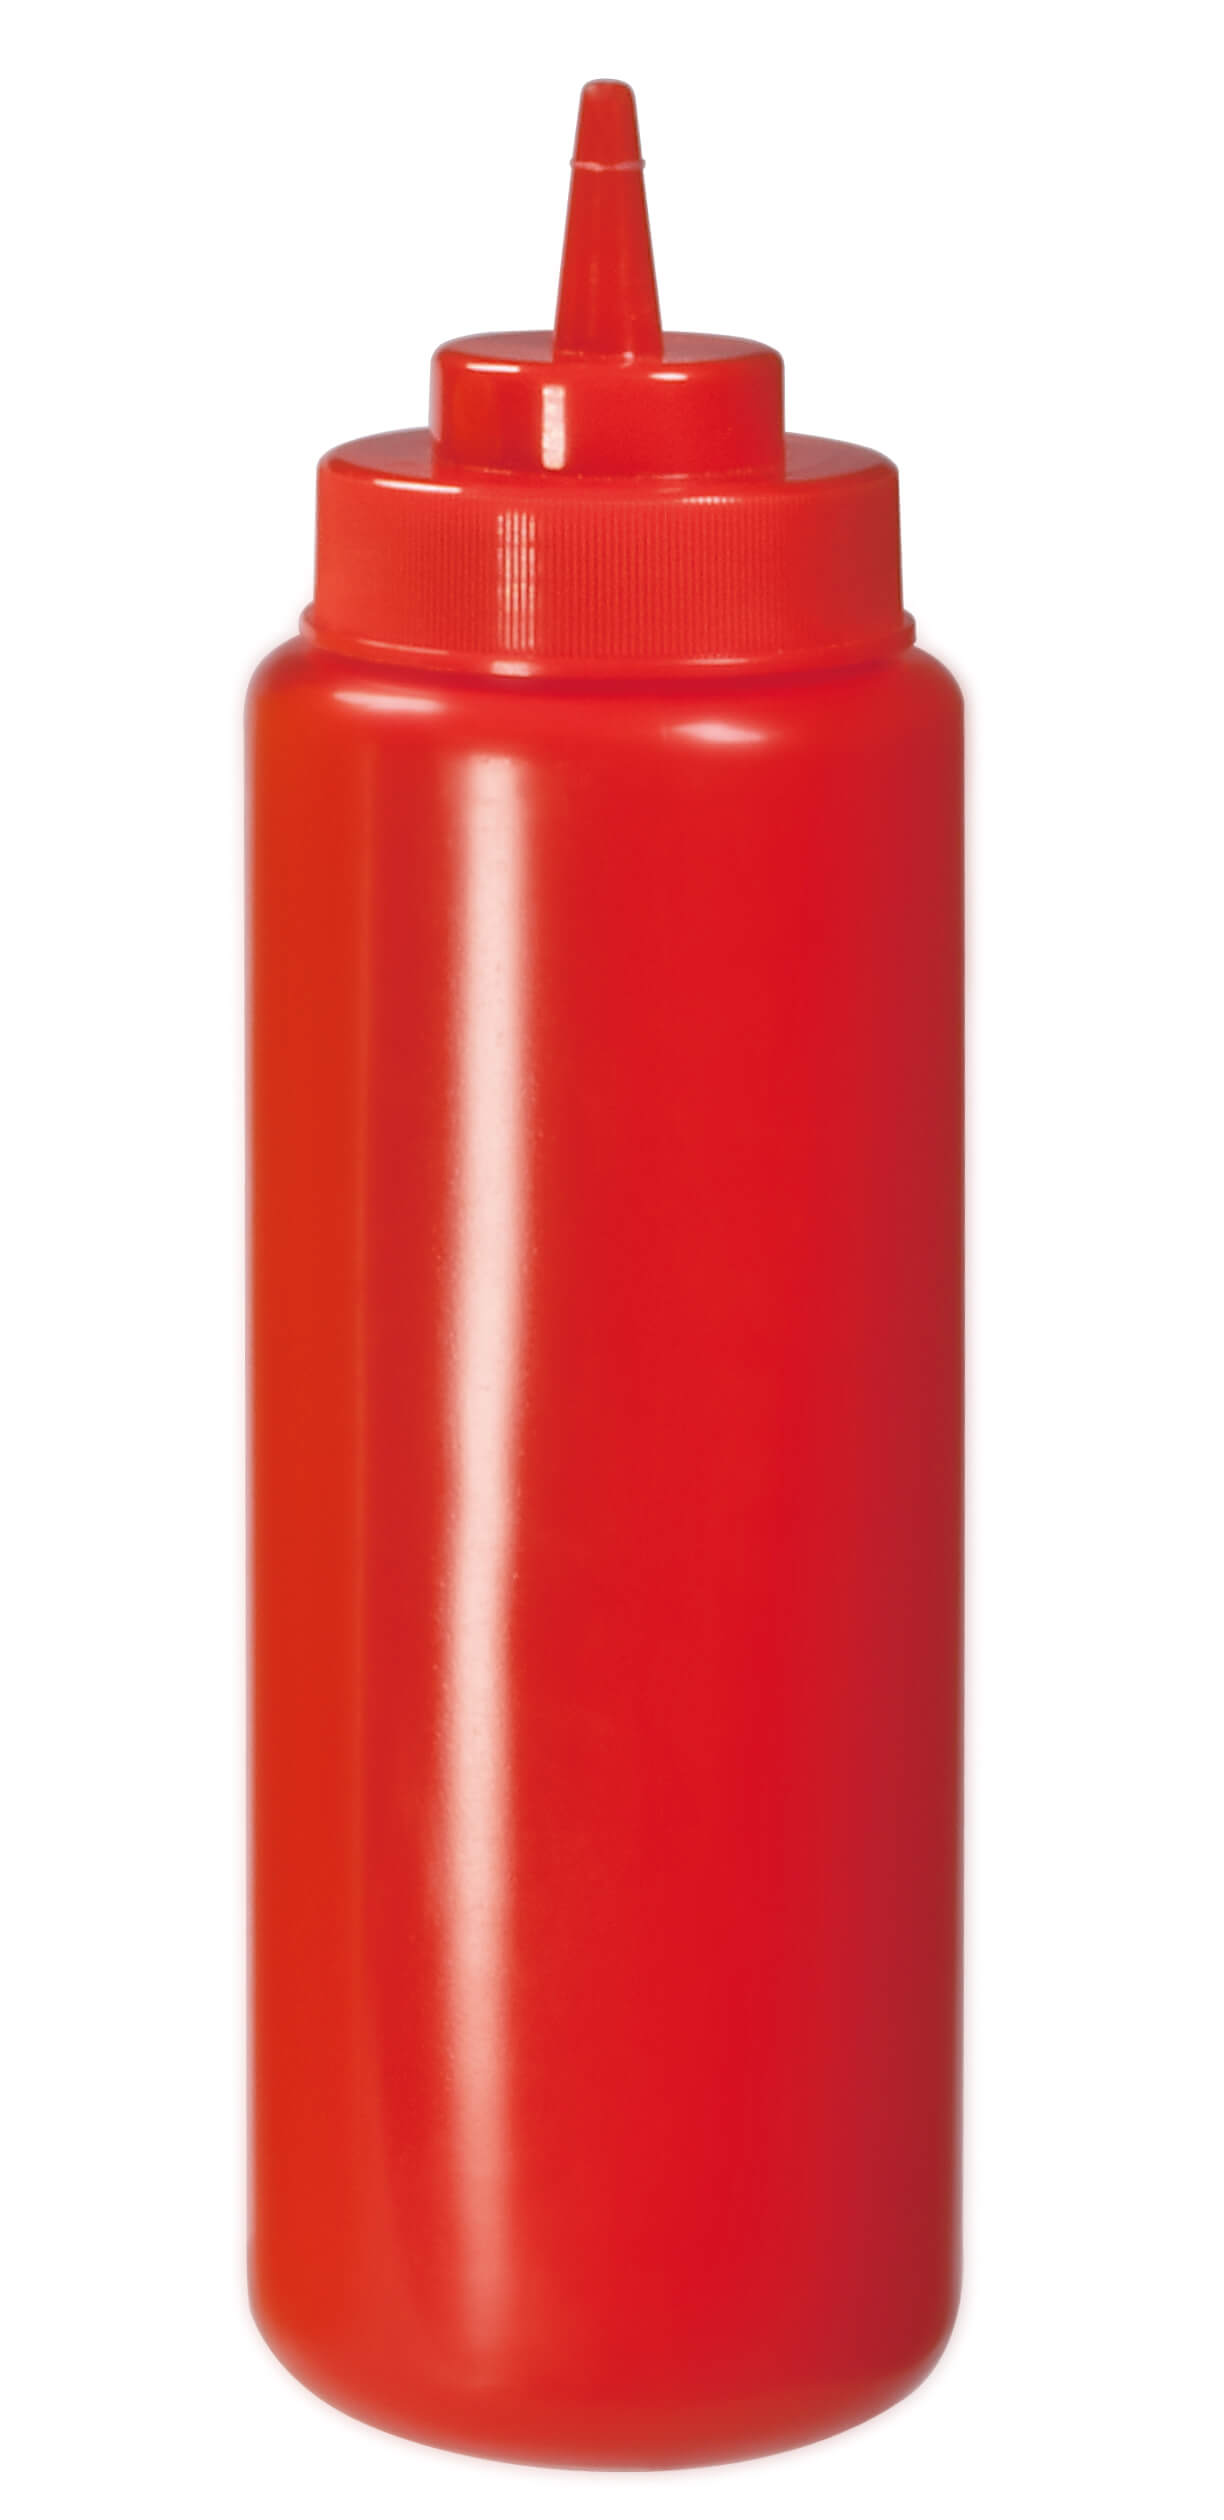 Squeeze Bottle, wide mouth, 950ml - red